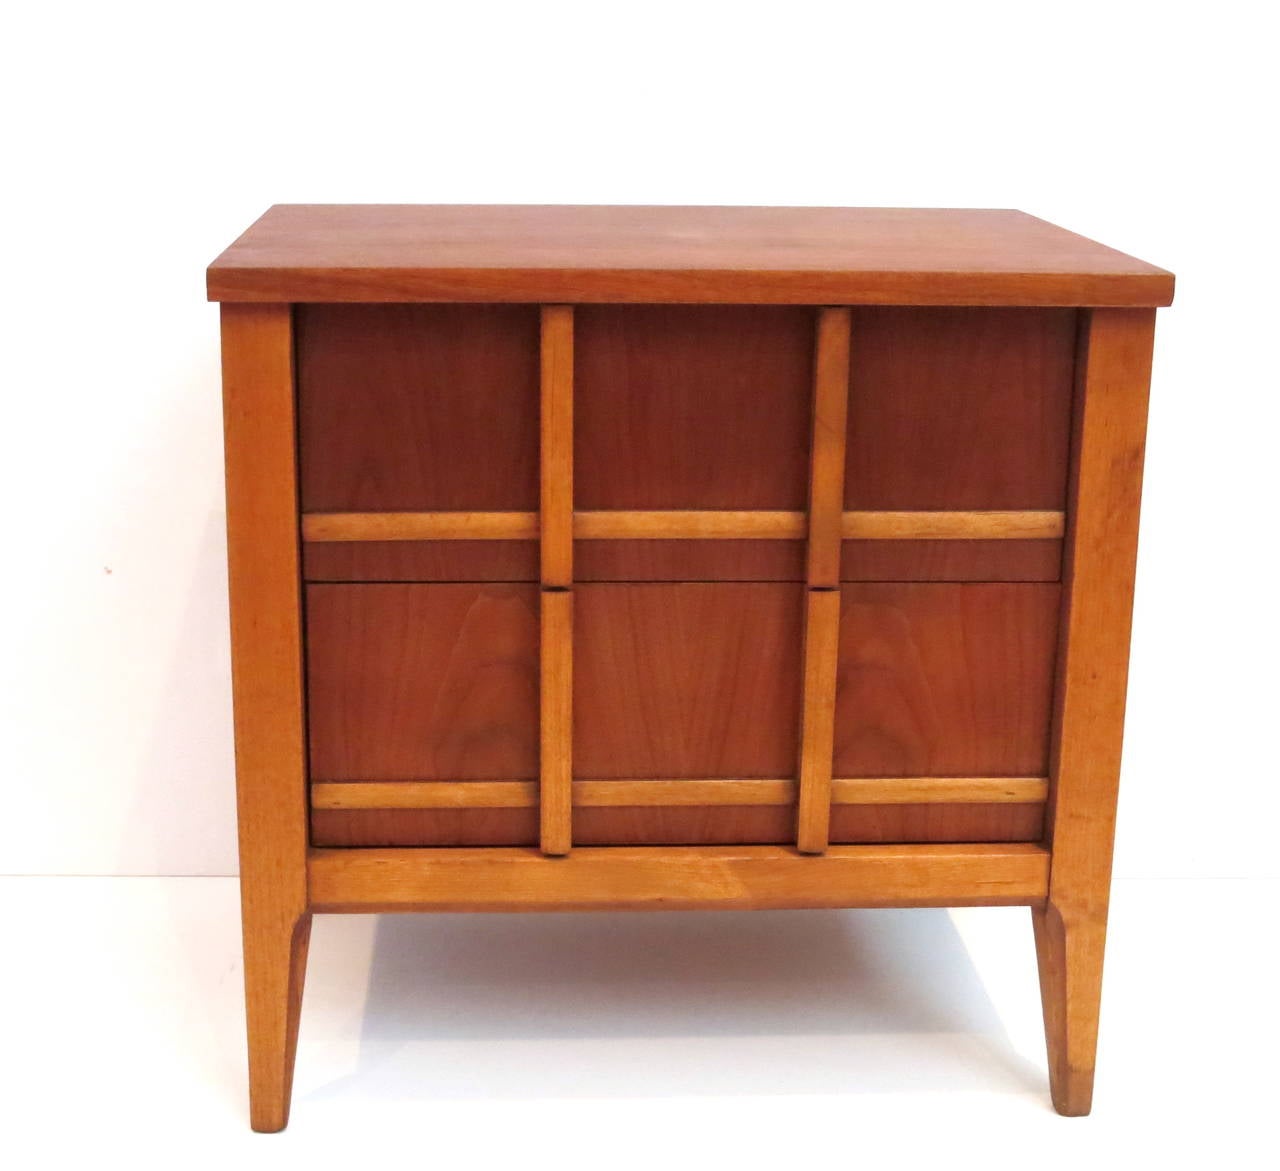 Great set of two American walnut nightstands, circa 1950s in walnut with light walnut accents, the set has been completely refinish it’s in great condition double drawers, solid and sturdy.